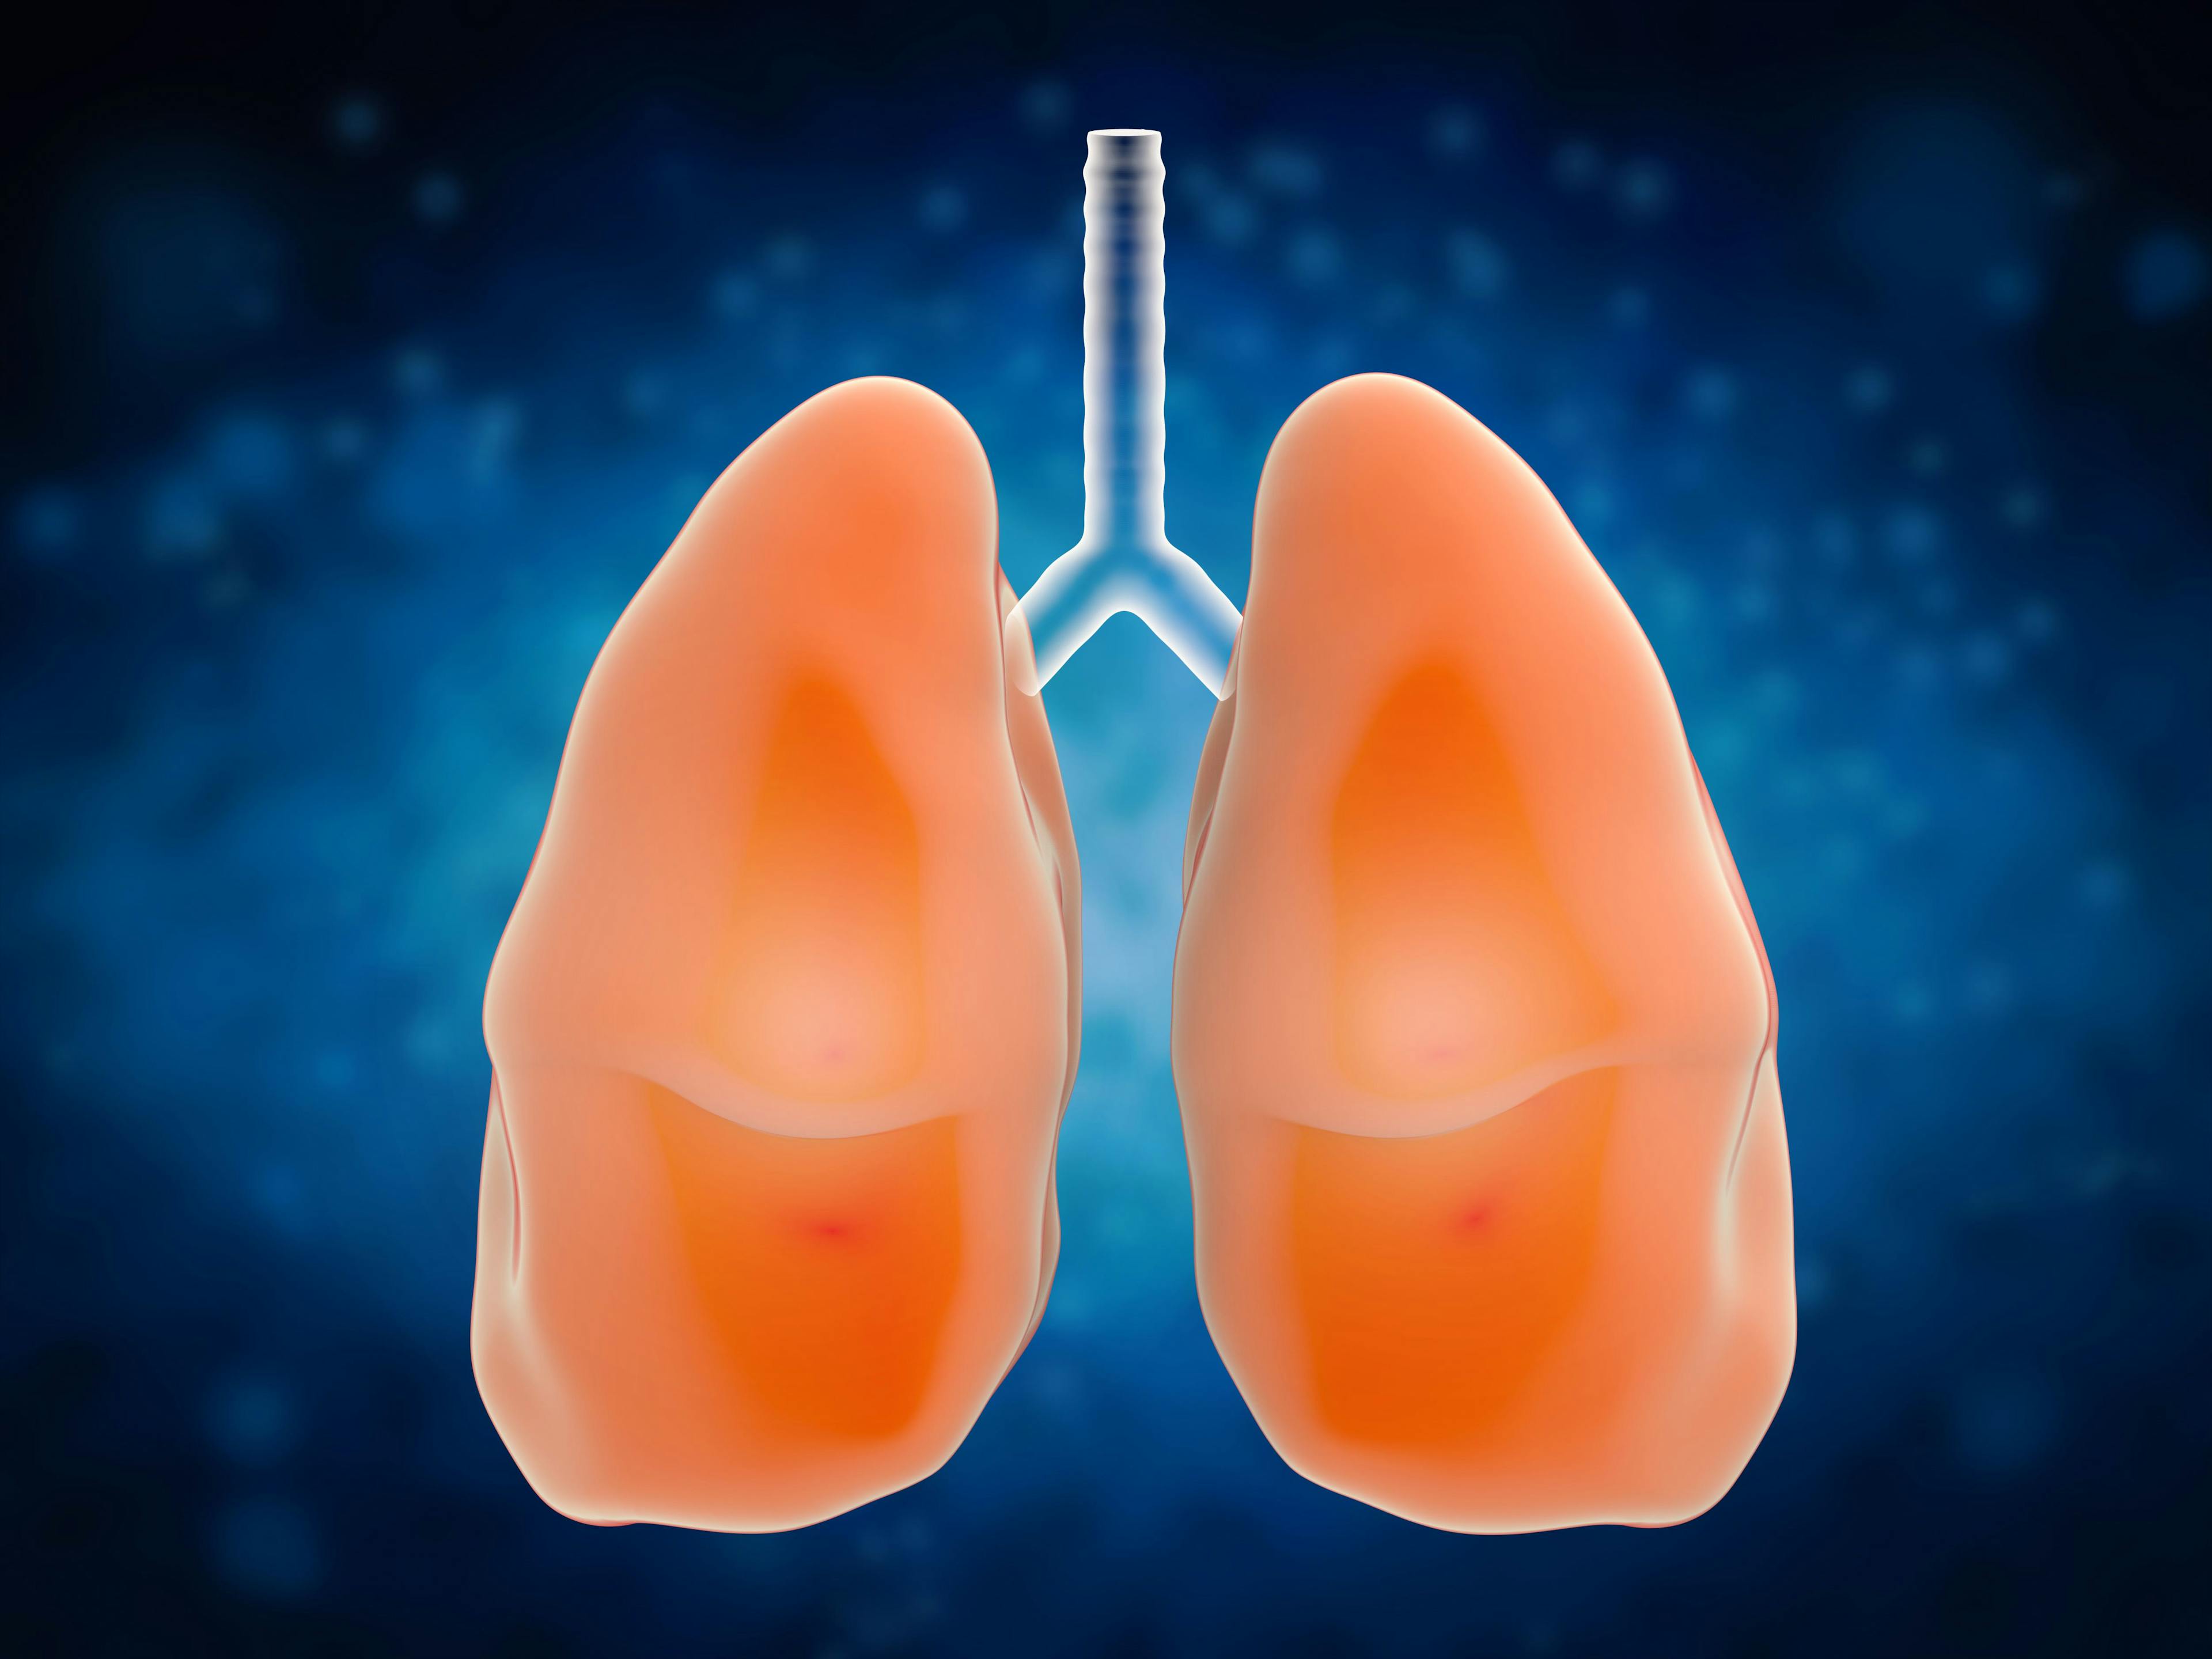 Findings from 3 phase 3 trials support the marketing authorization application for tislelizumab as a treatment for patients with non–small cell lung cancer in the European Union.